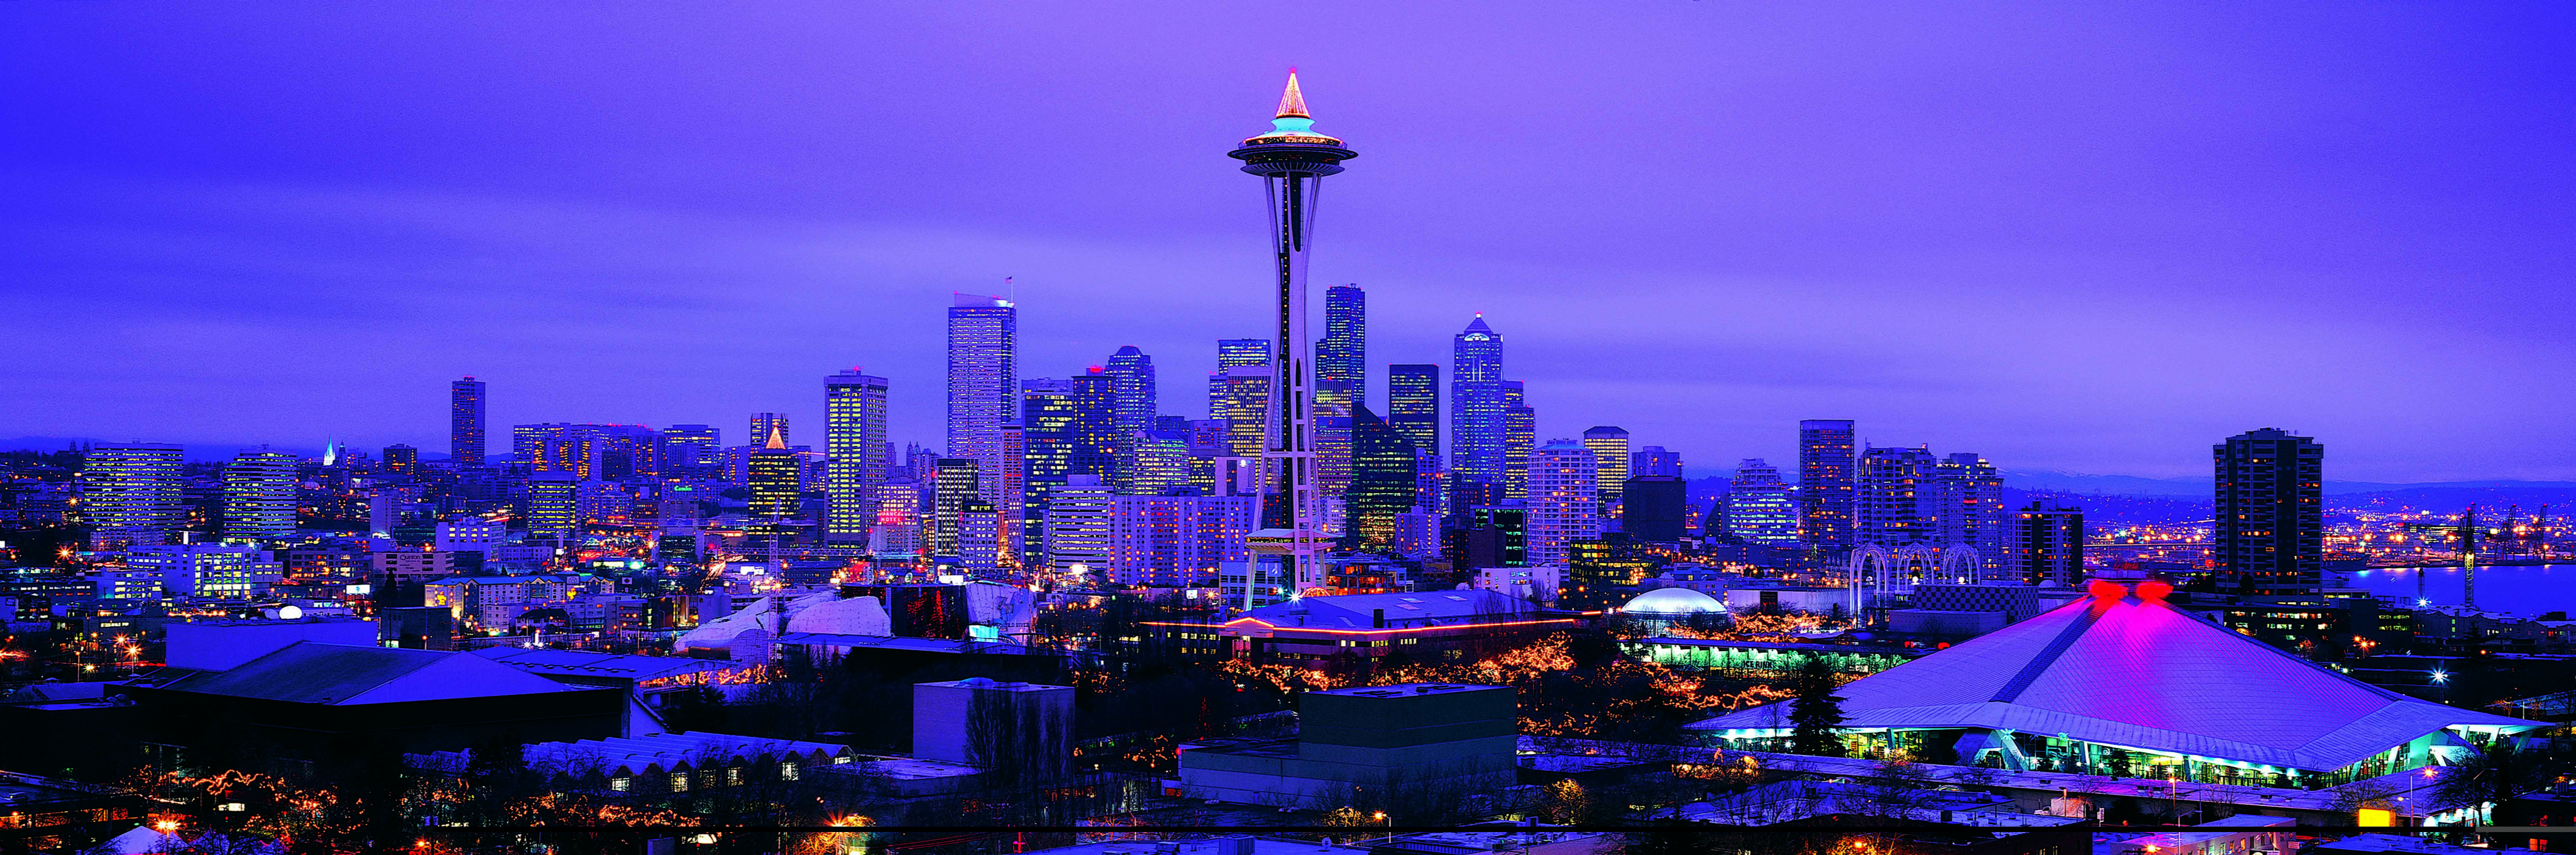 cityscape of space needle tower, american, american, Panoramas